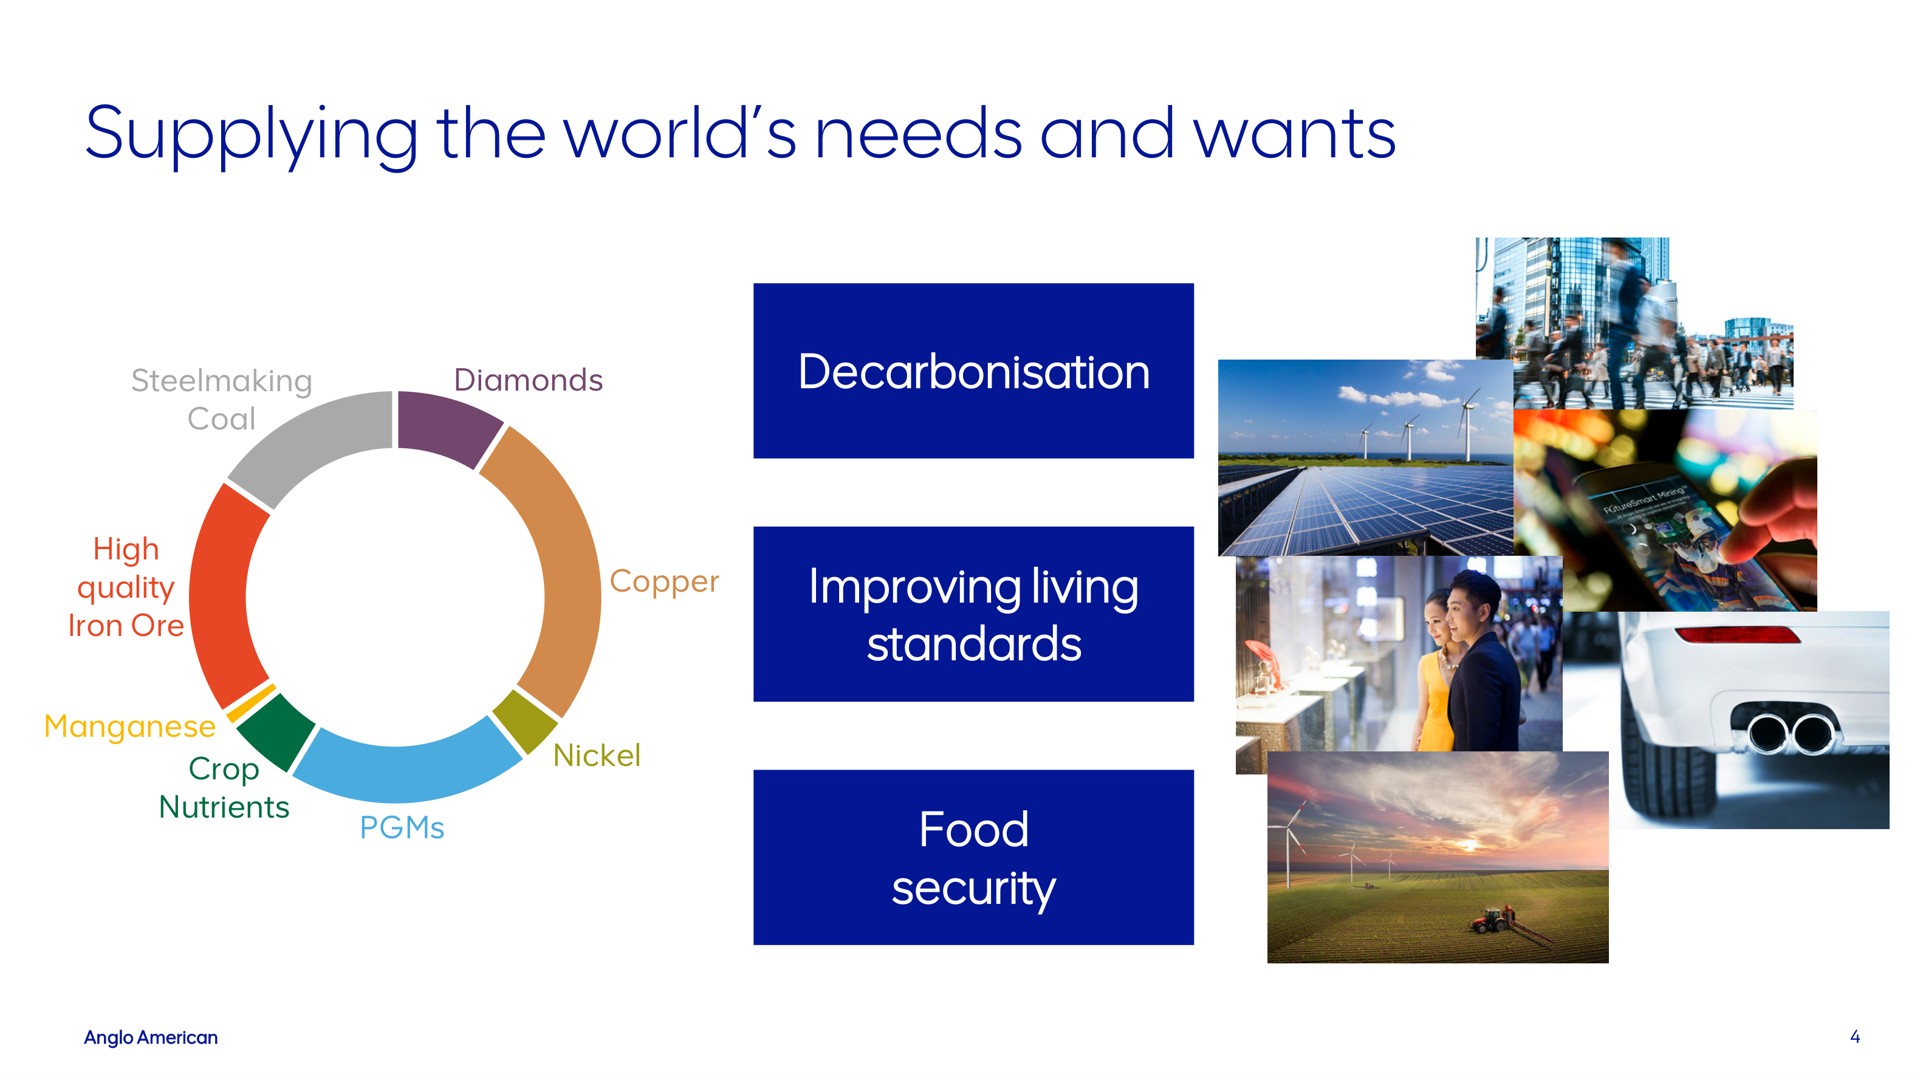 supplying the world needs and wants too | AngloAmerican